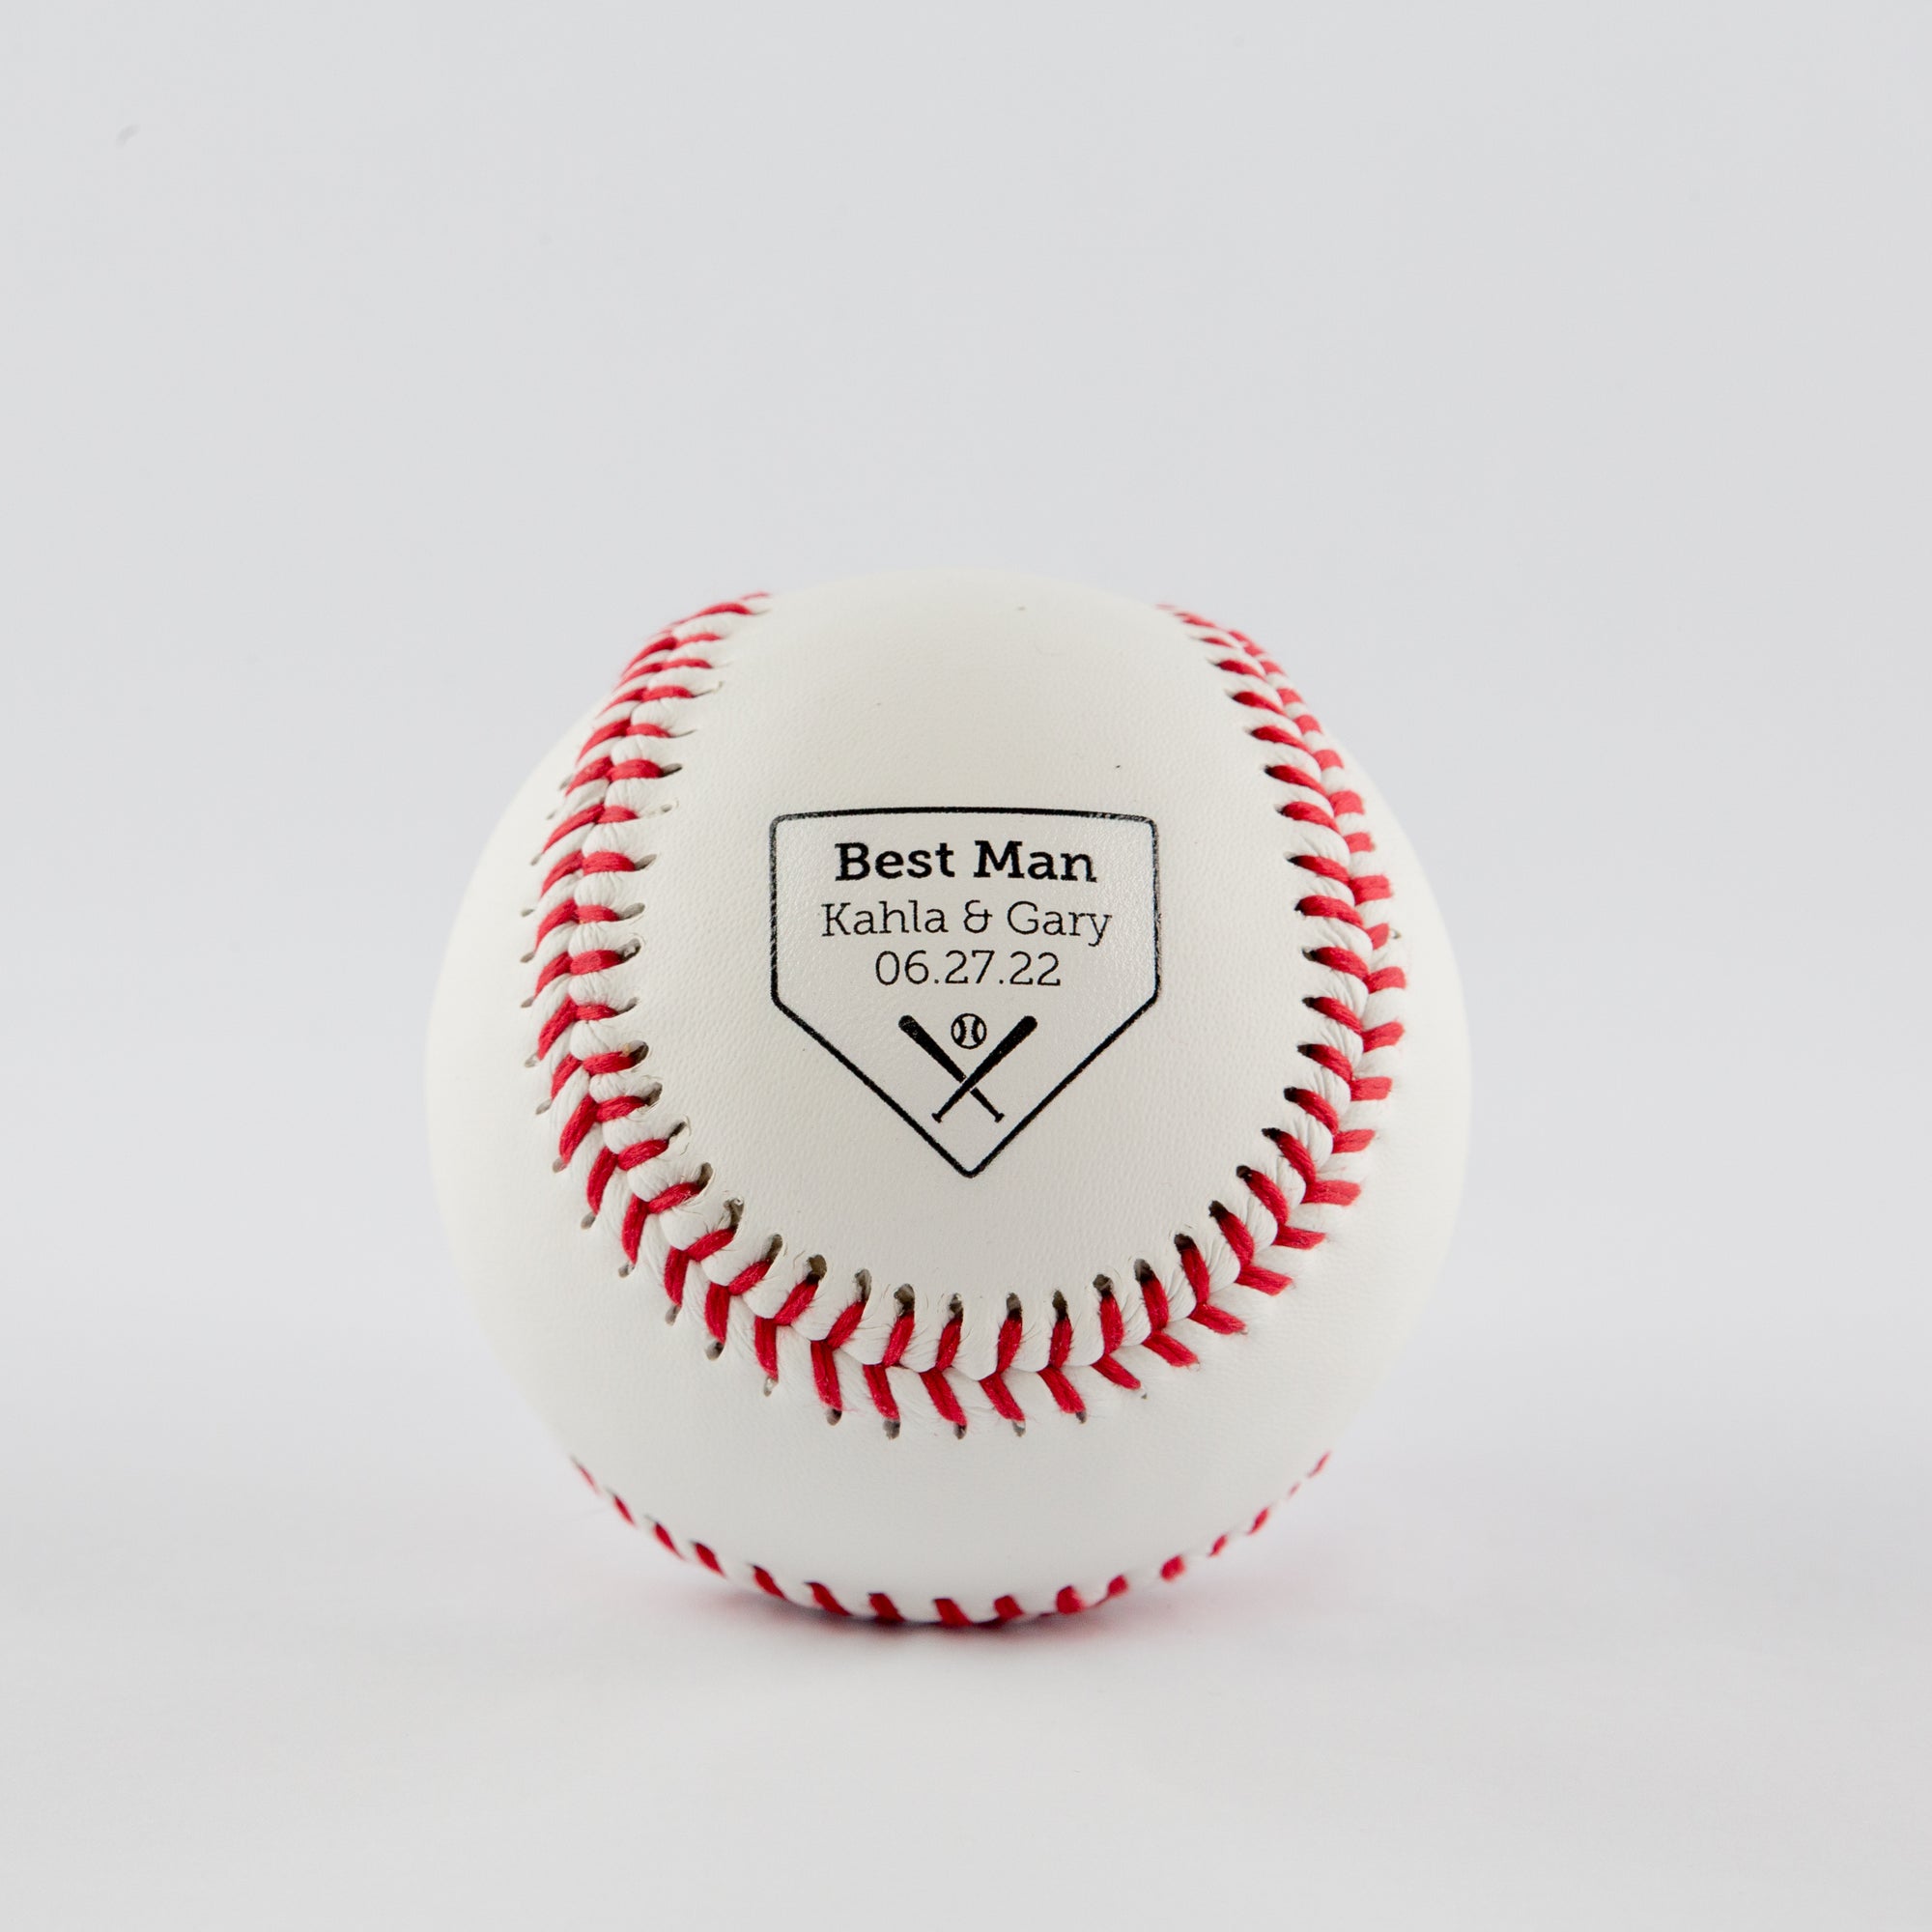 Printed Baseball with Home Plate Wedding Party Role, Couple Name, Wedding Date Design